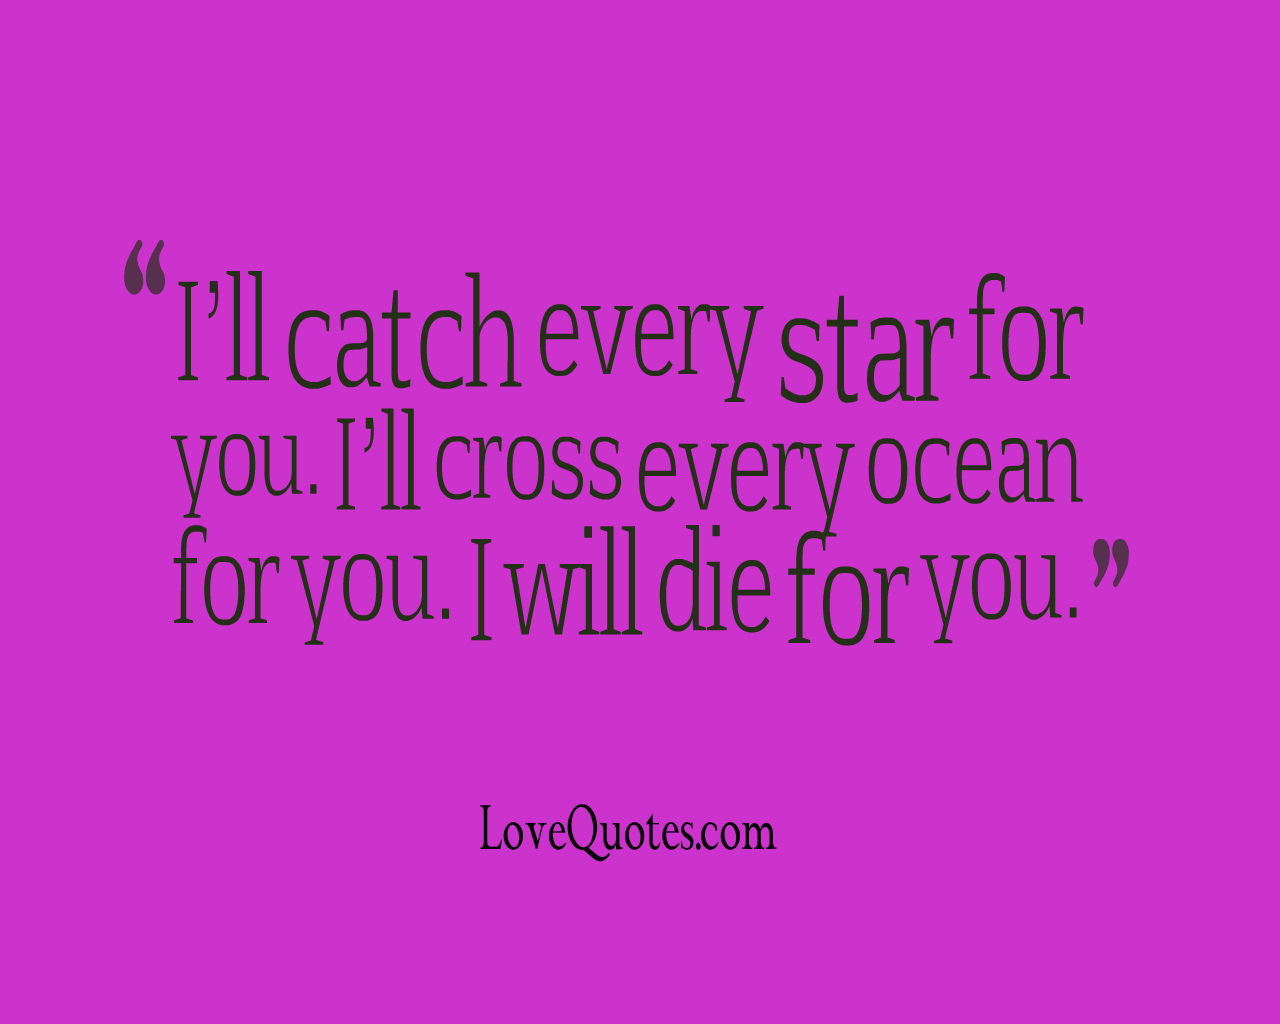 Every Star For You